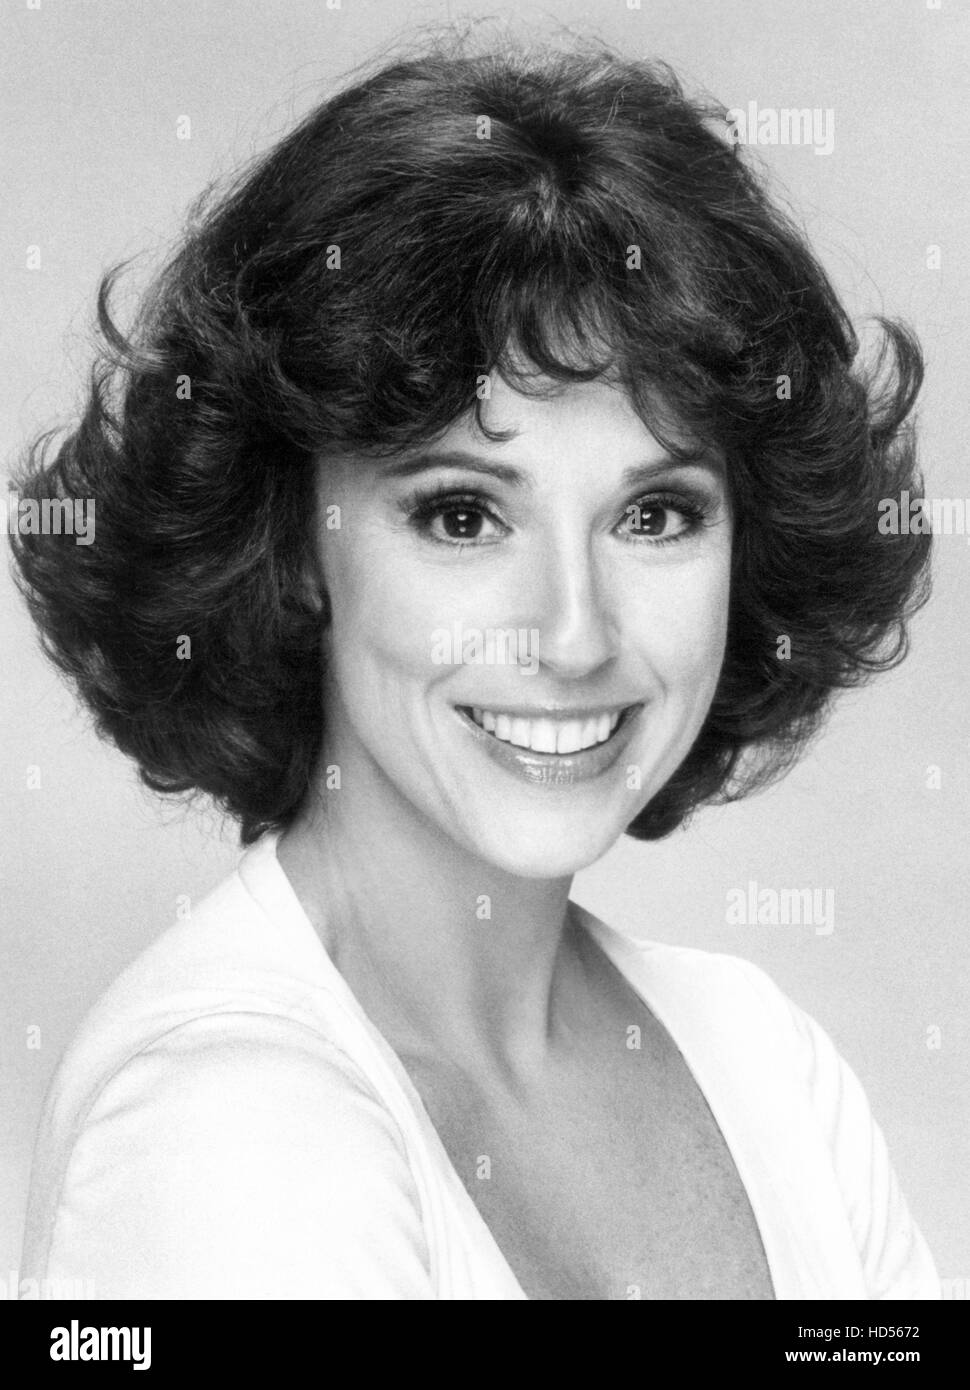 GENERAL HOSPITAL, Denise Alexander, (ca. early 1980s), 1963-. © ABC ...